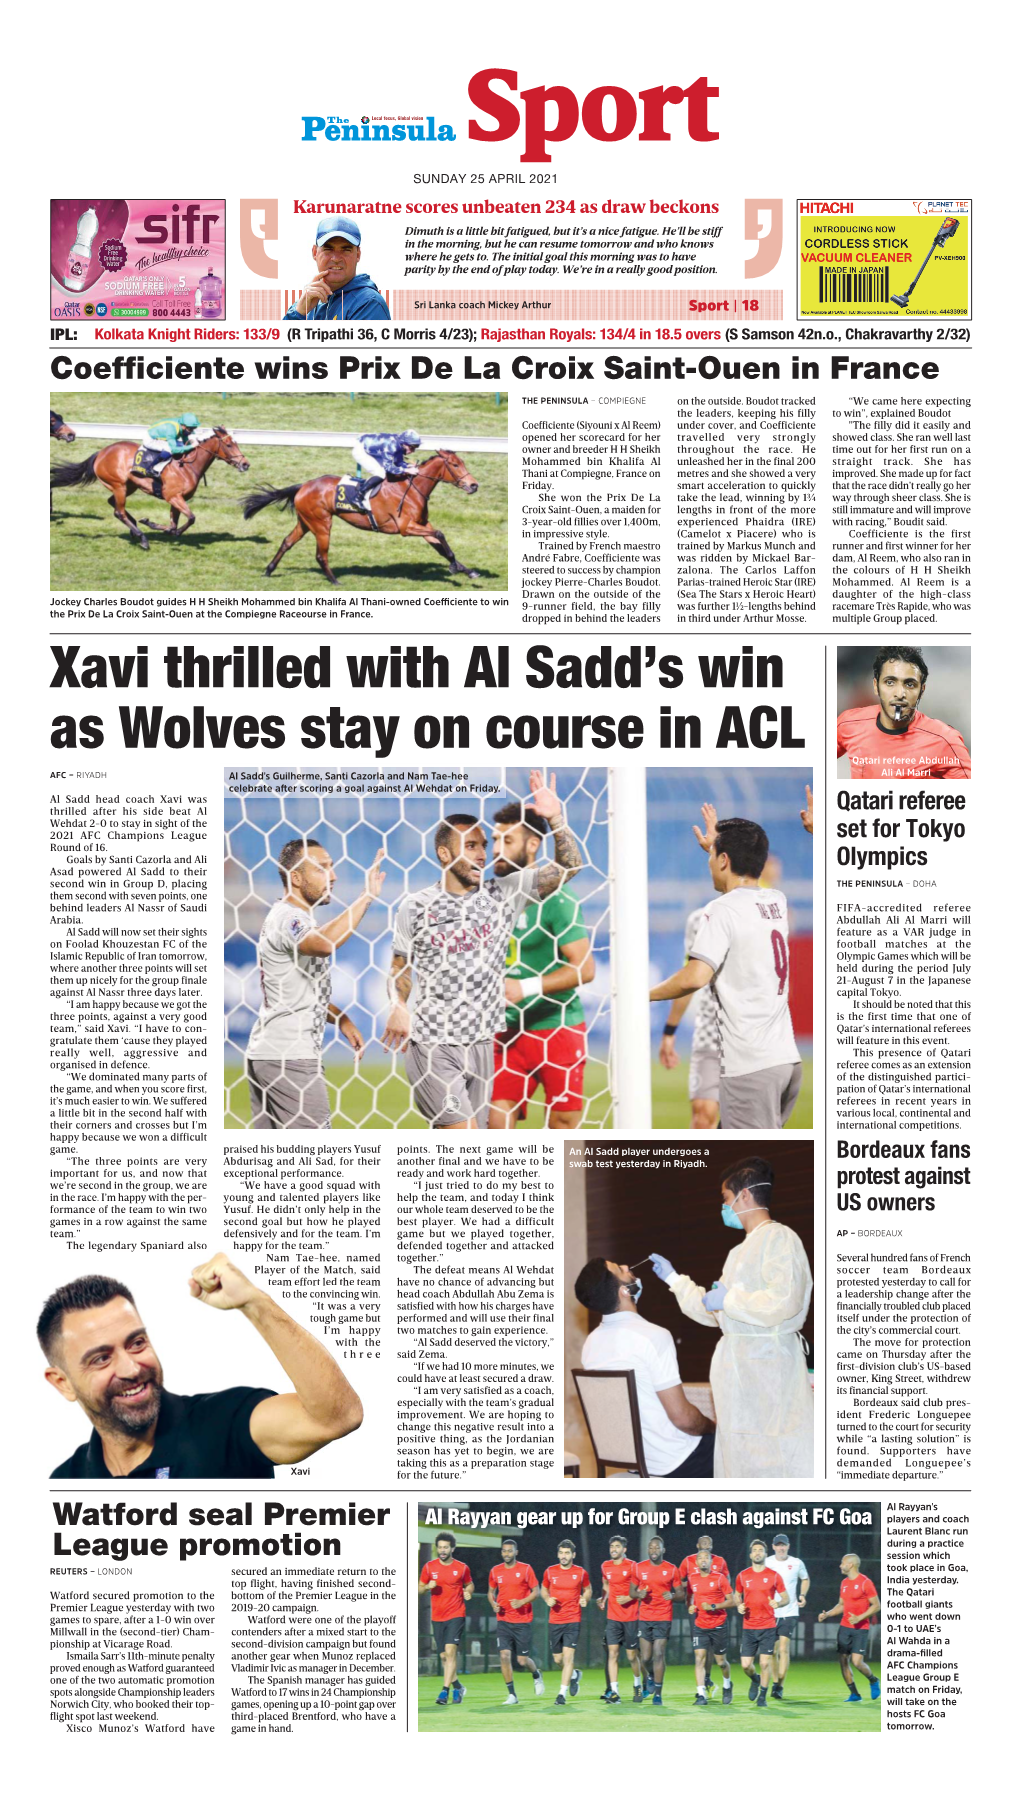 Xavi Thrilled with Al Sadd's Win As Wolves Stay on Course In